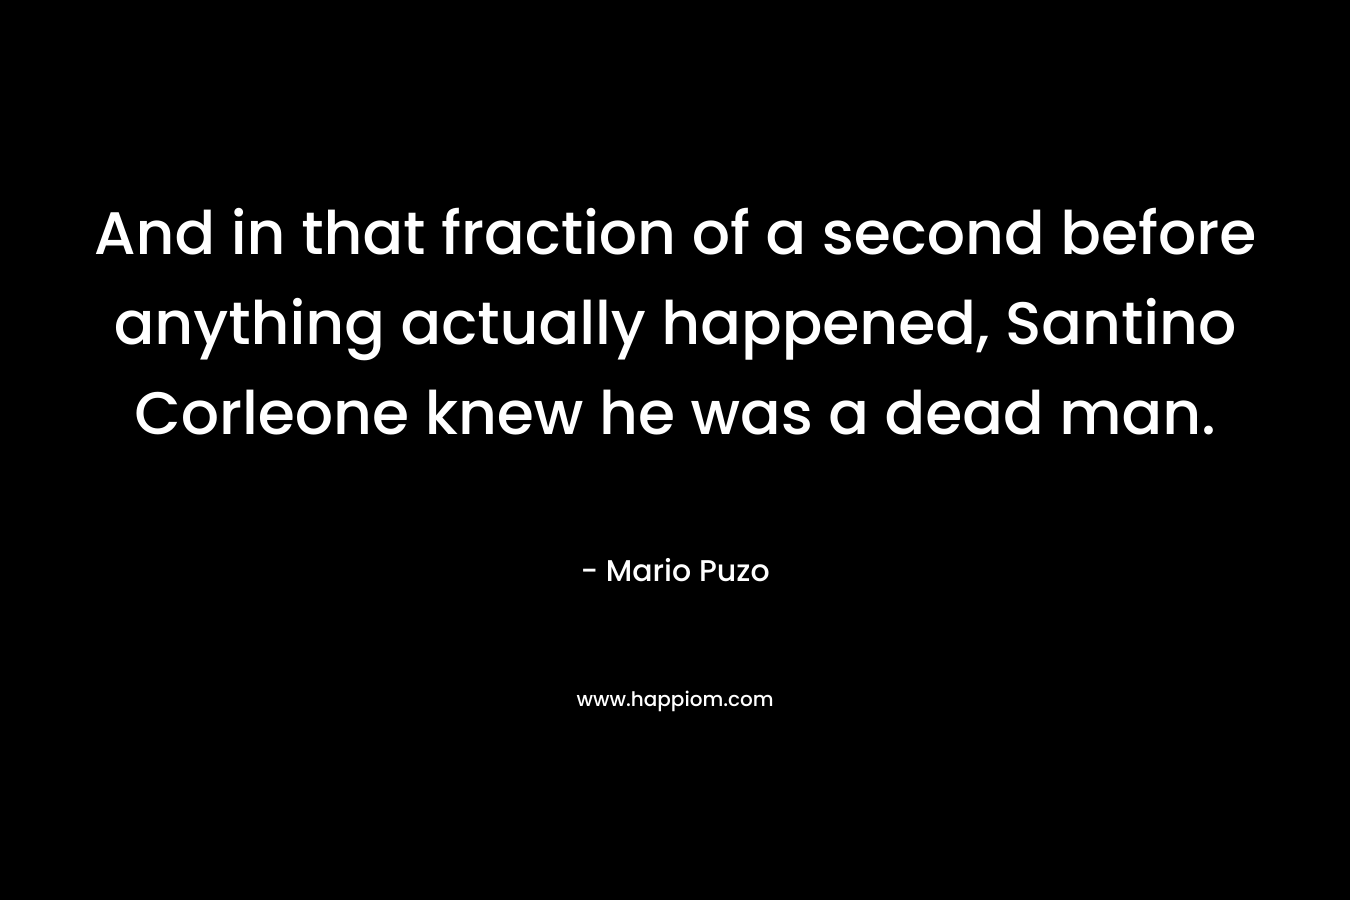 And in that fraction of a second before anything actually happened, Santino Corleone knew he was a dead man. – Mario Puzo